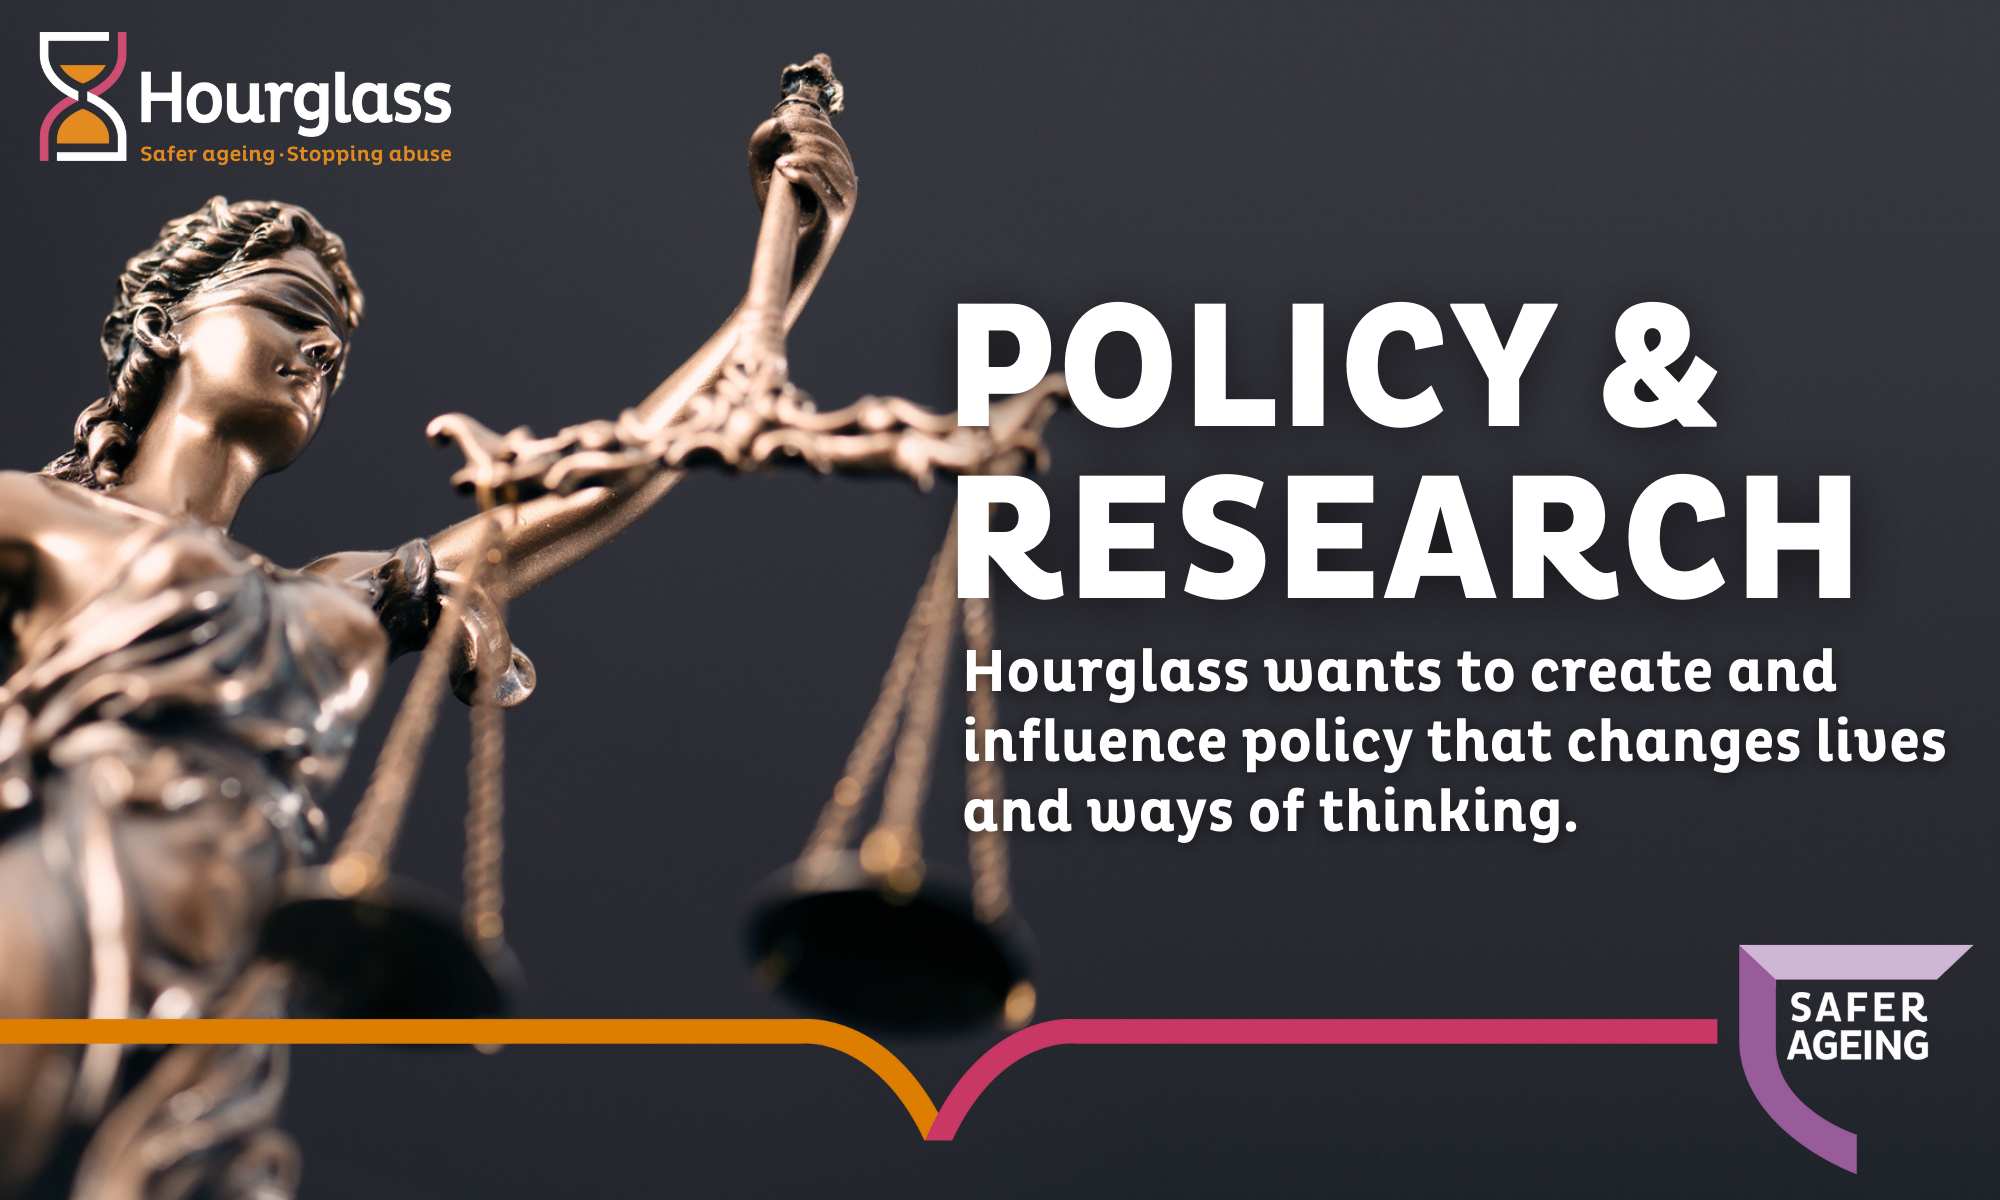 Policy and Research